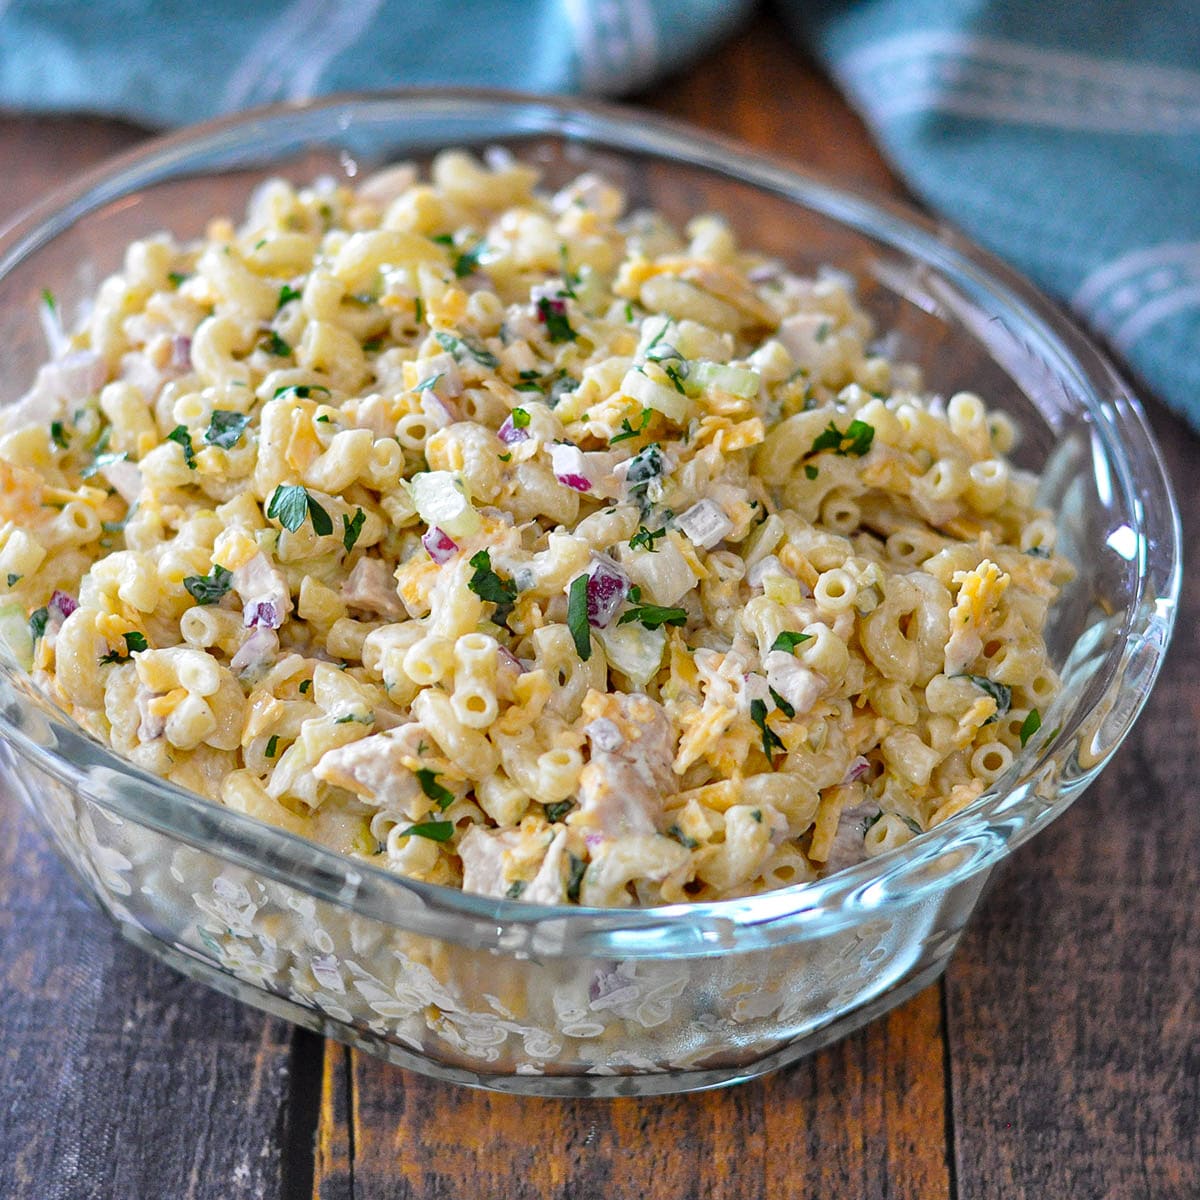 macaroni salad with chicken in a clear glass bowl.